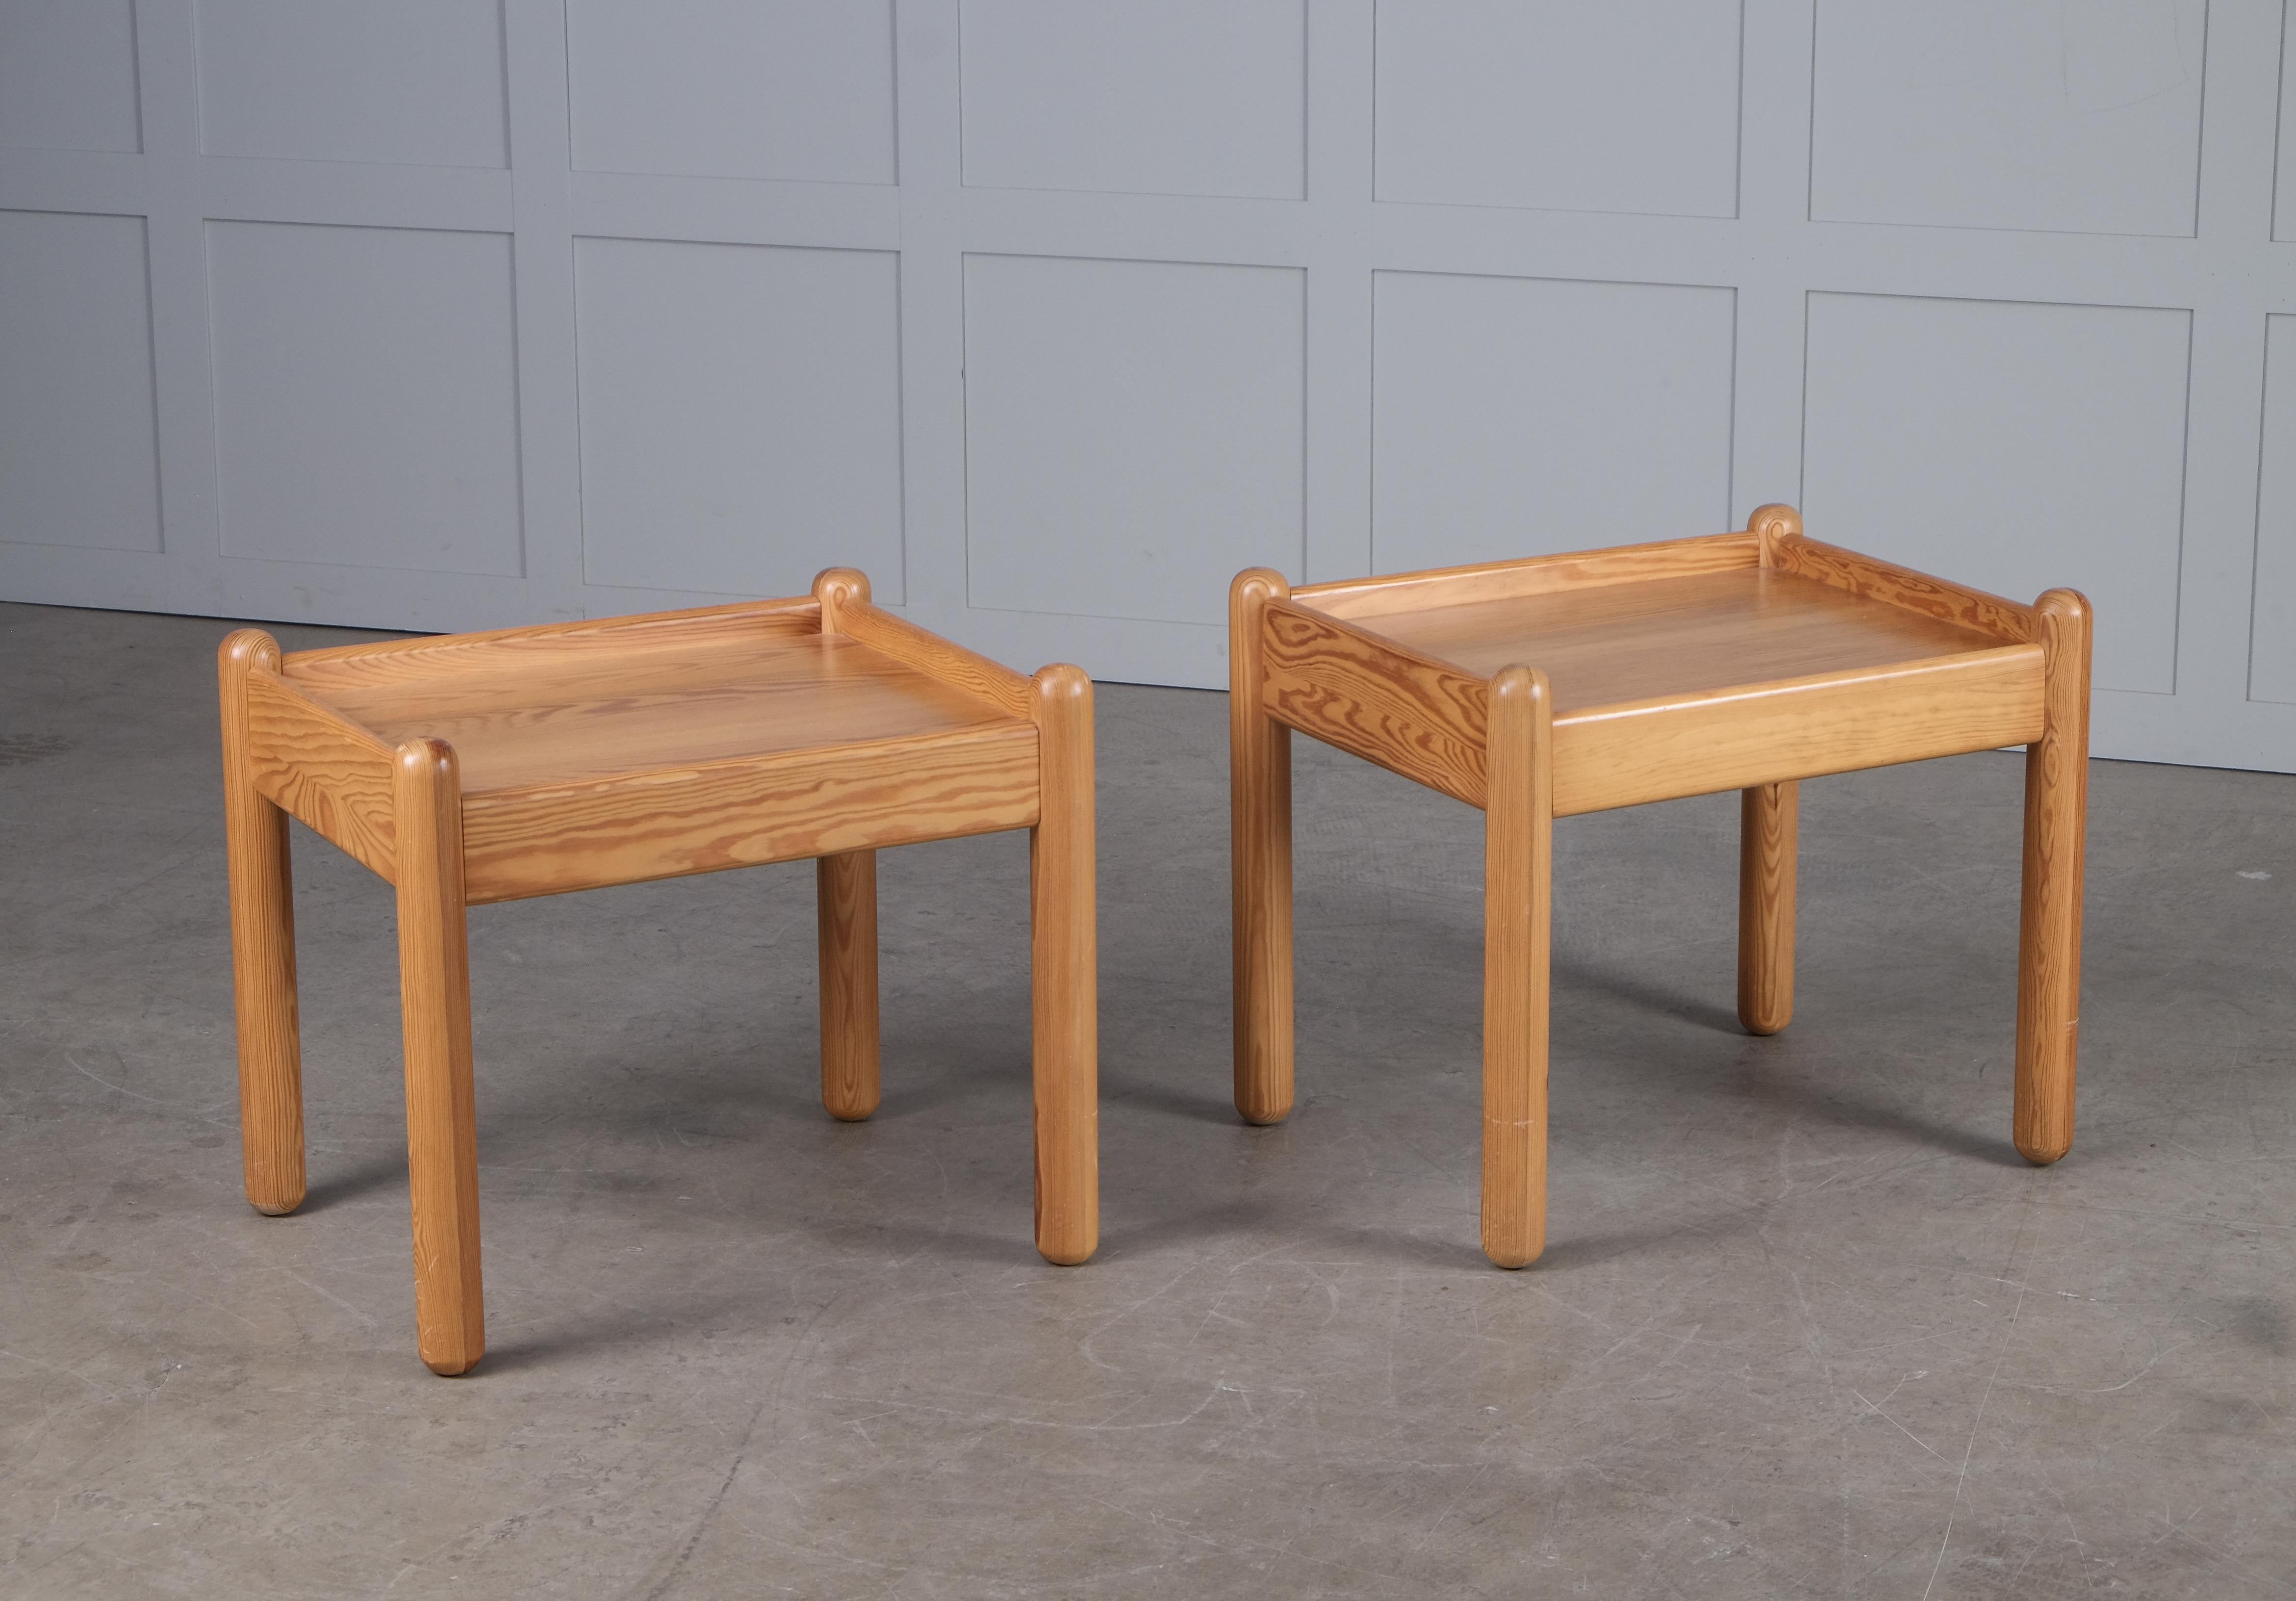 Pair of bedside tables in pine, produced in Denmark, 1970s.
Good original condition with small signs of usage.

4 tables available, listed price is for a pair.